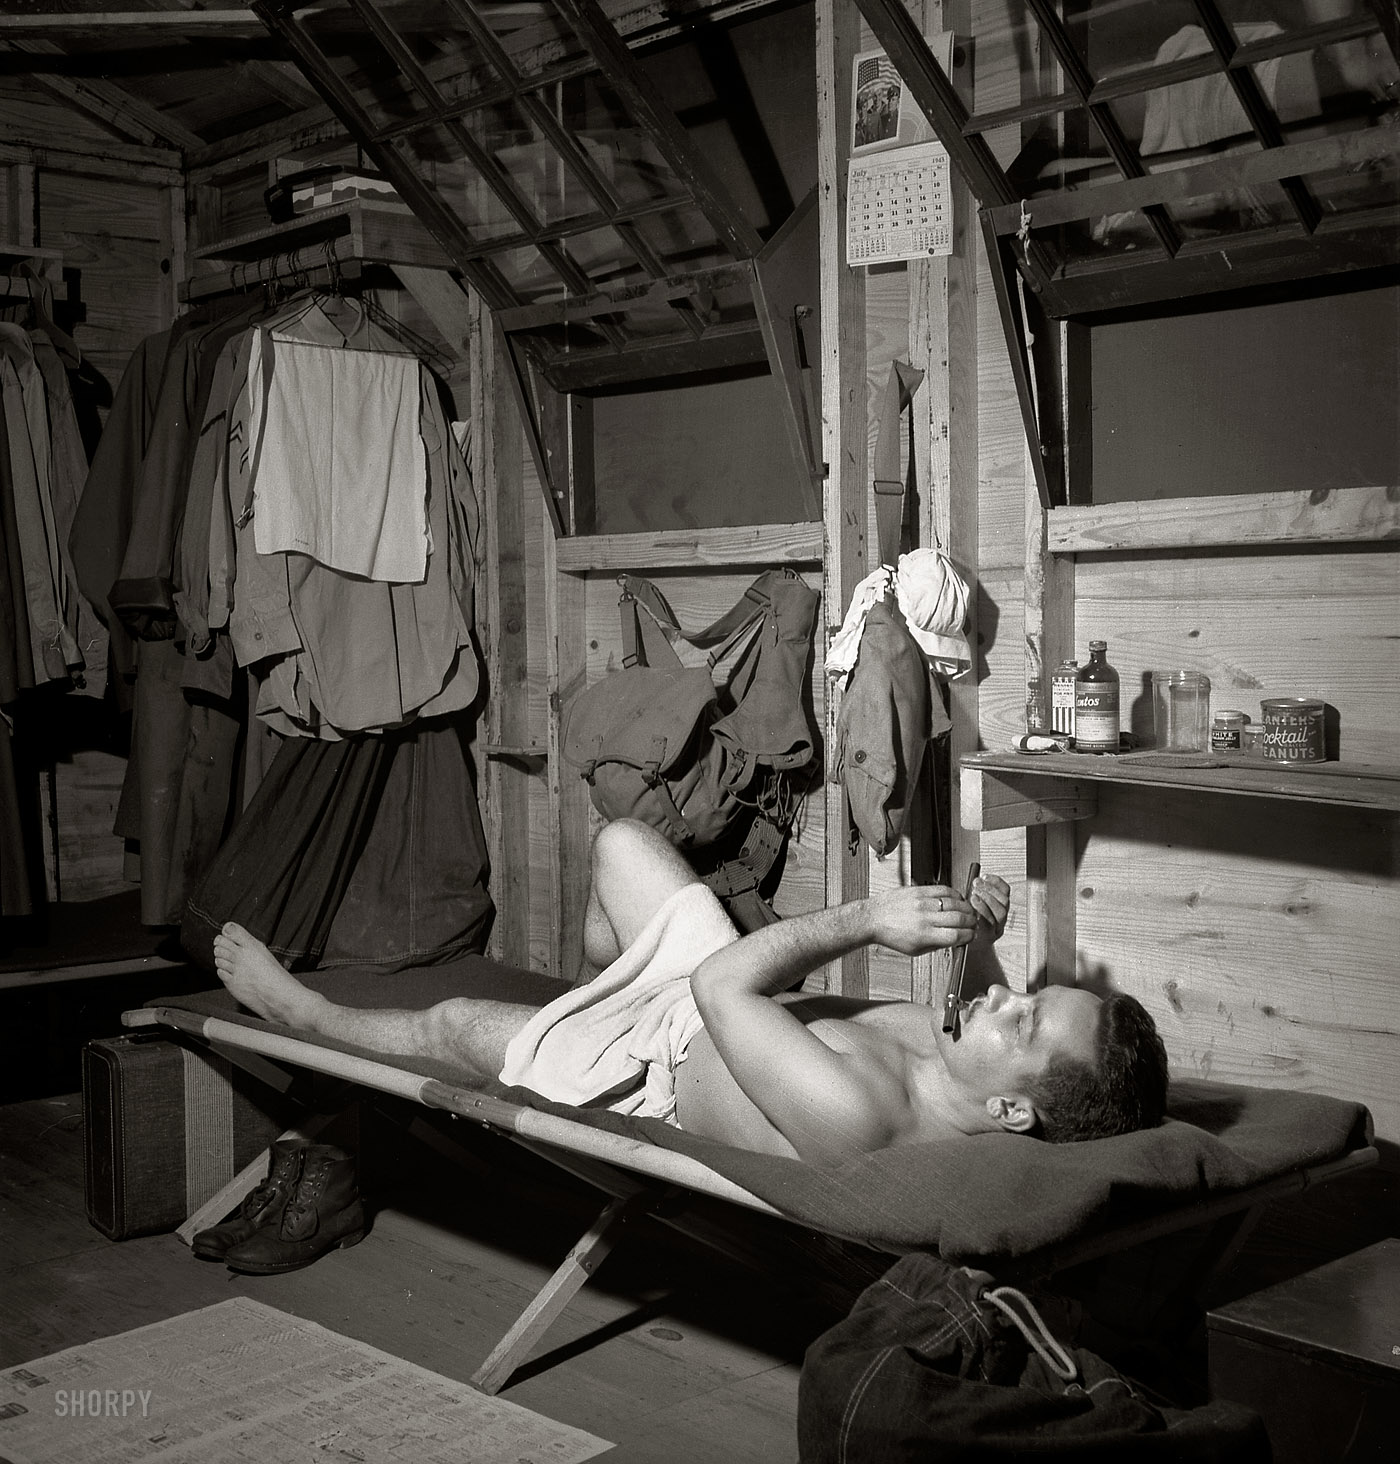 July 1943. "Greenville, South Carolina. Air Service Command. A scene in one of the barracks. Enlisted man playing the flute after he has taken a shower." Photograph by Jack Delano for the Office of War Information. View full size.